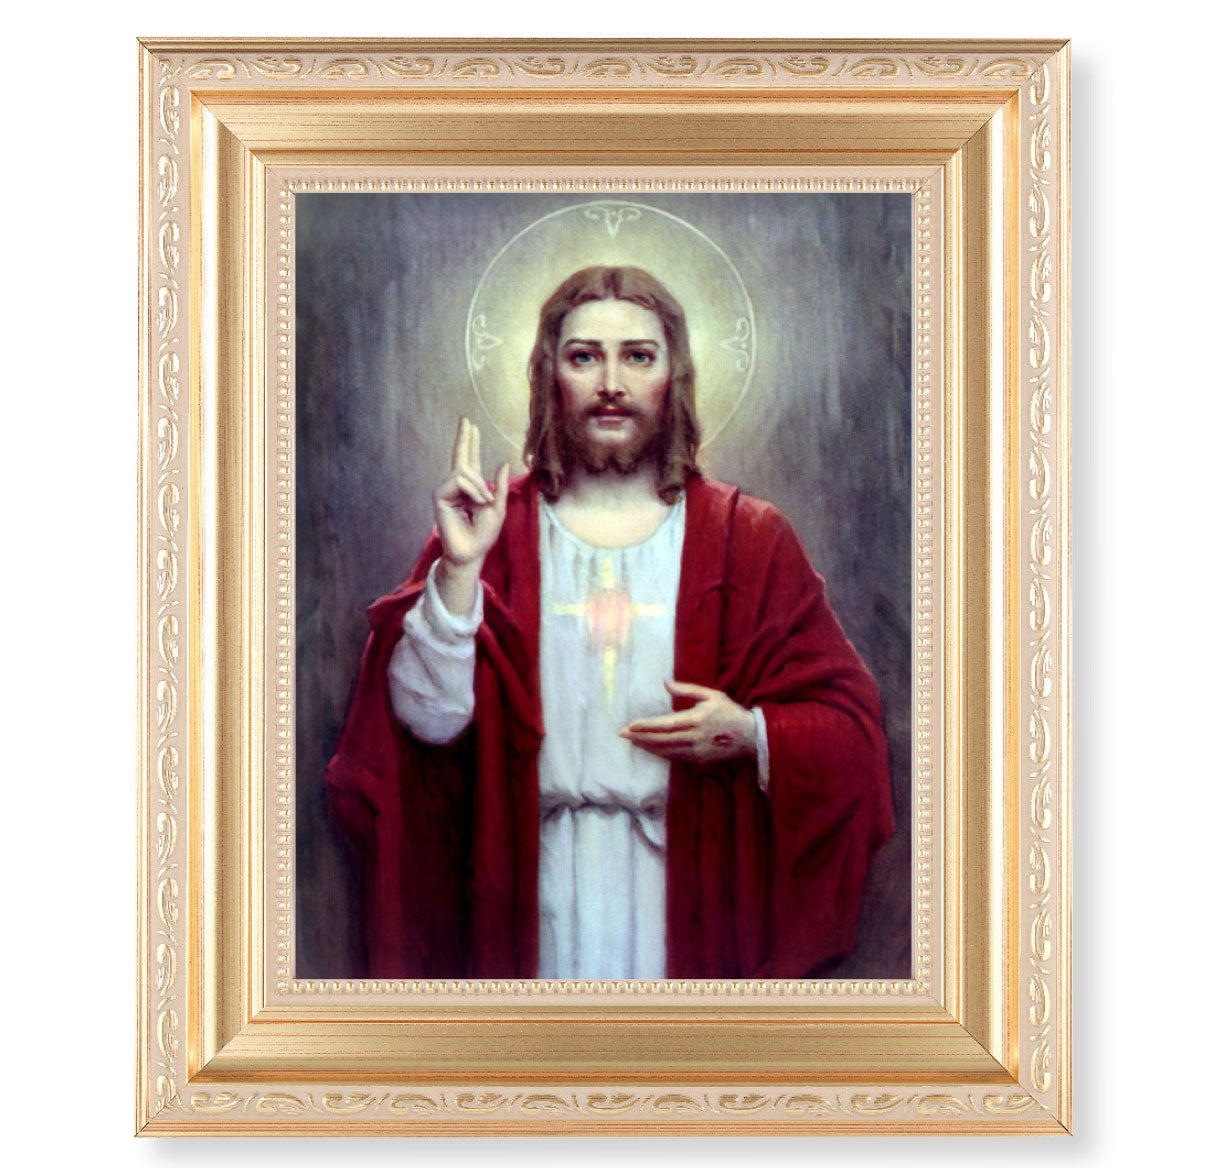 Sacred Heart of Jesus Picture Framed Wall Art Decor, Large, Satin Gold Fluted Frame with Distressed Finish and Fine Detailed Scrollwork